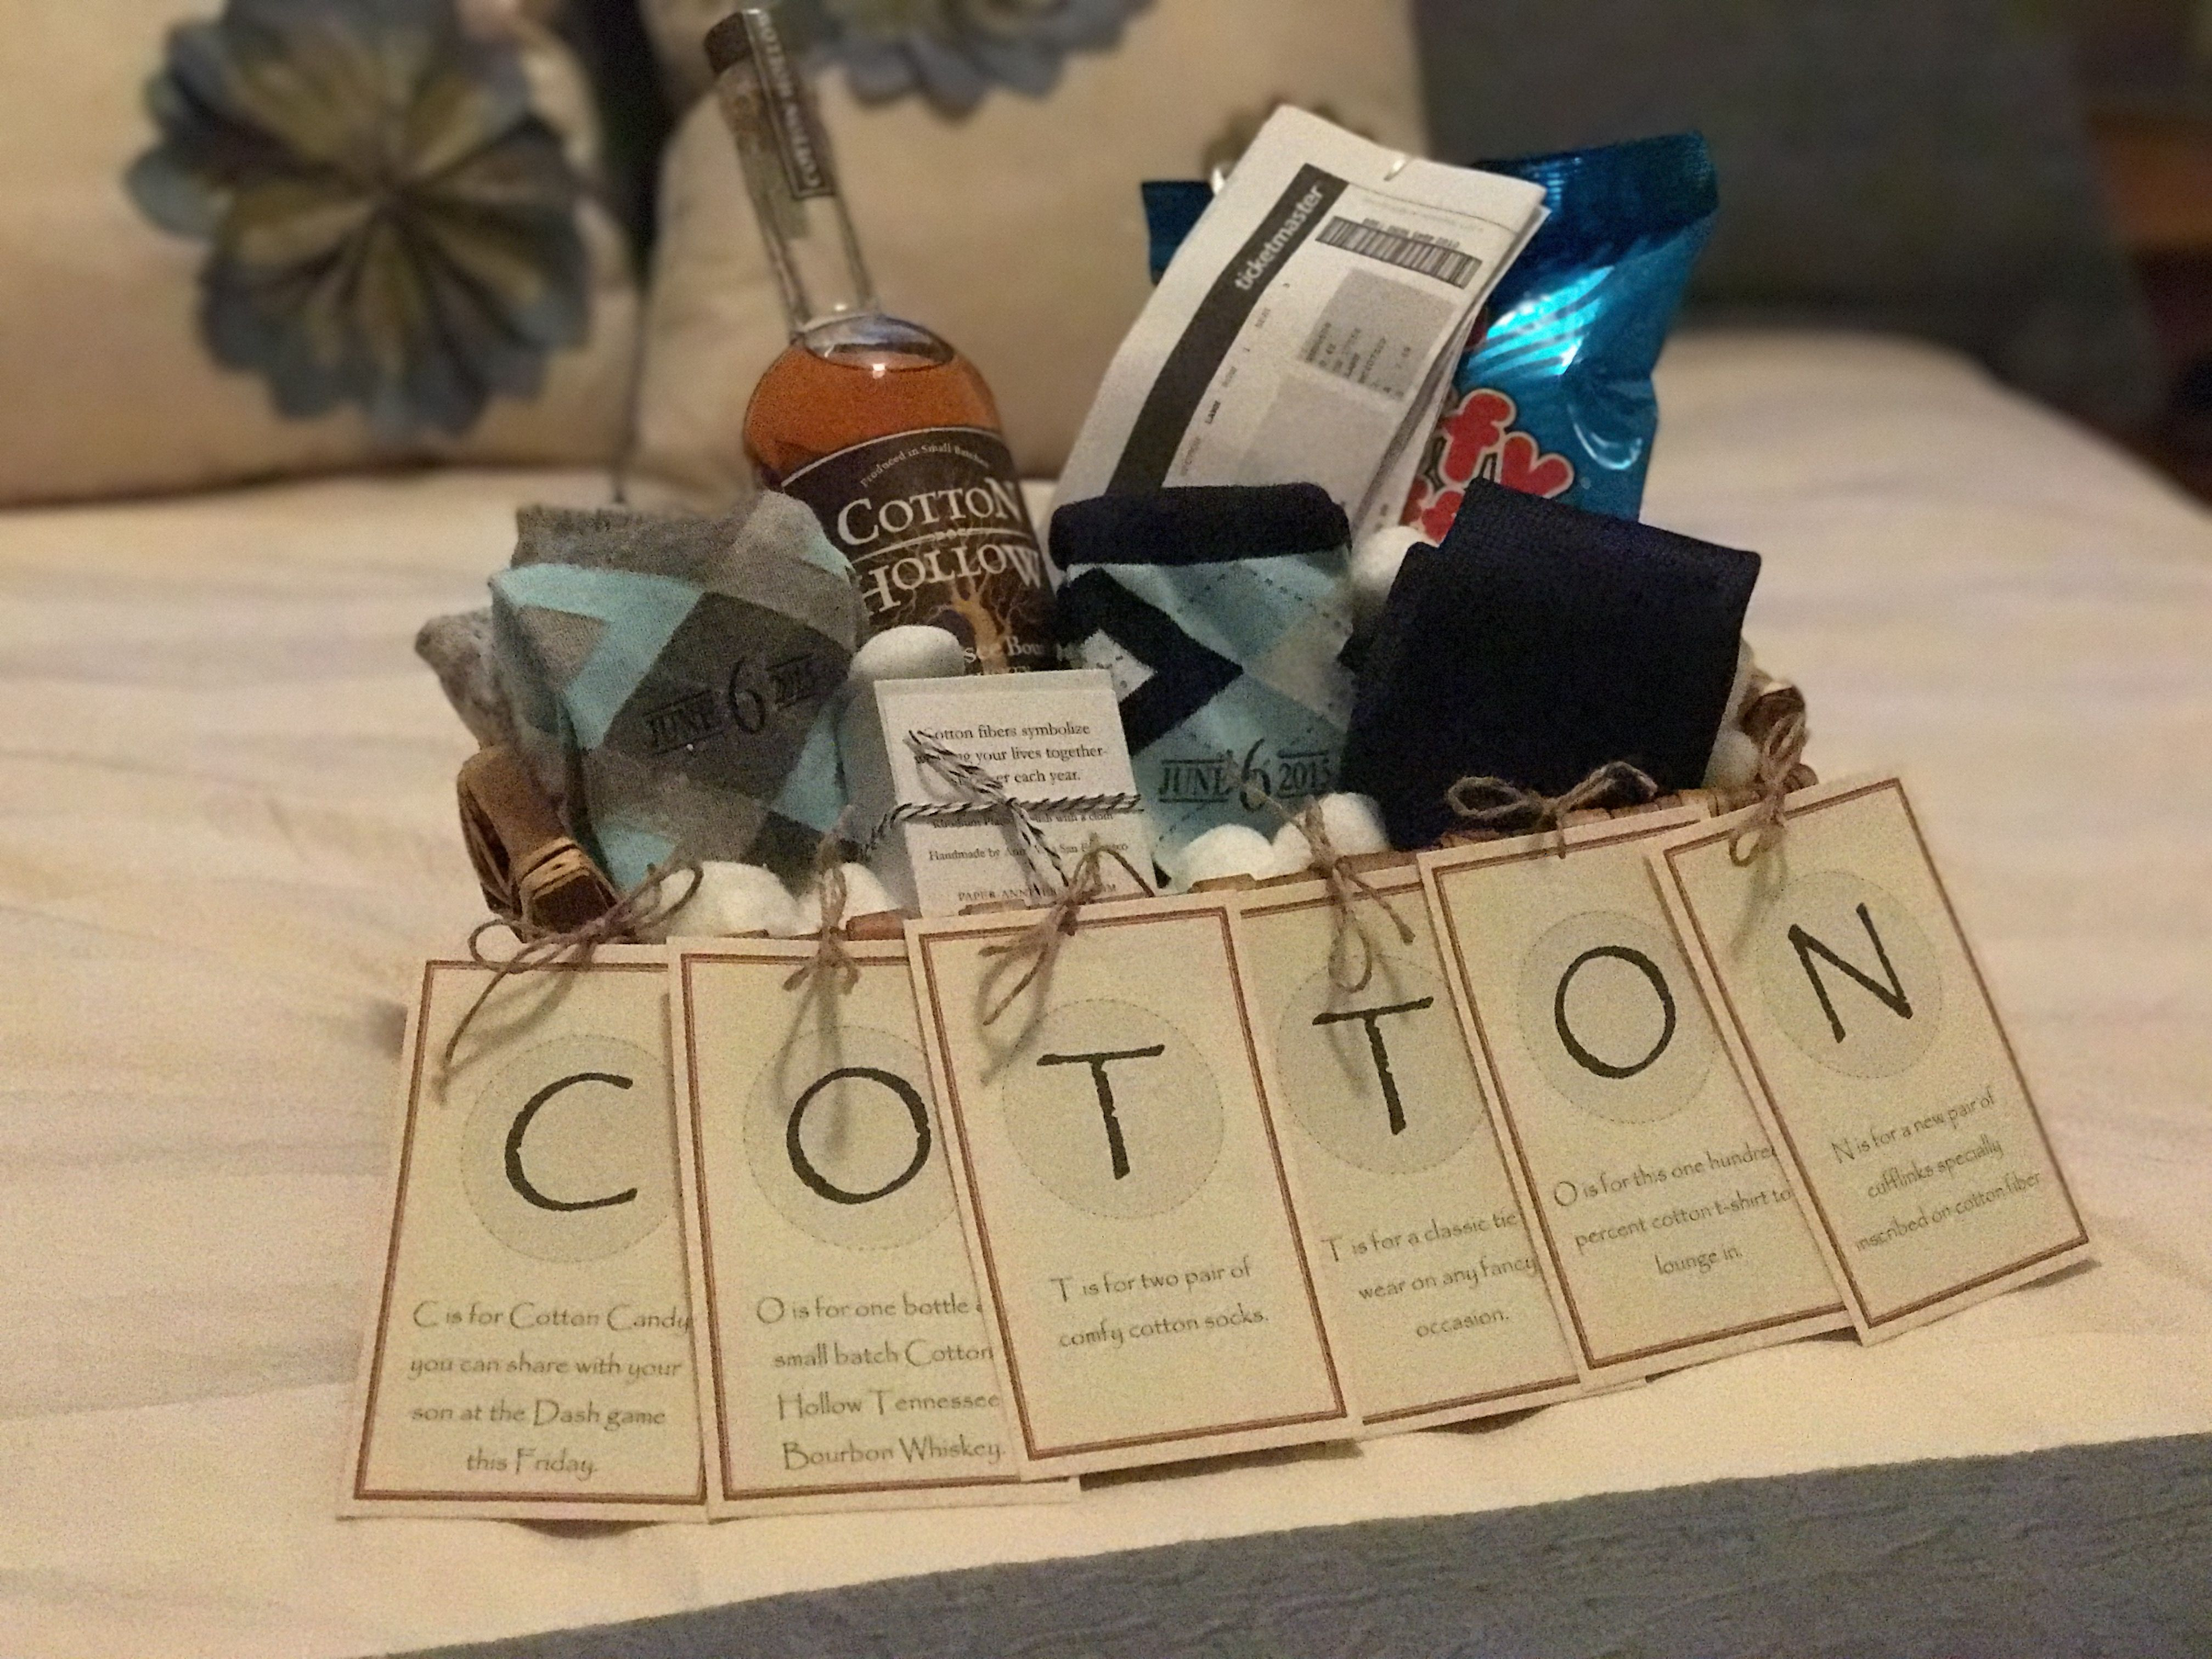 Wedding Gift Ideas For 2Nd Marriage
 The "Cotton" Anniversary Gift for Him